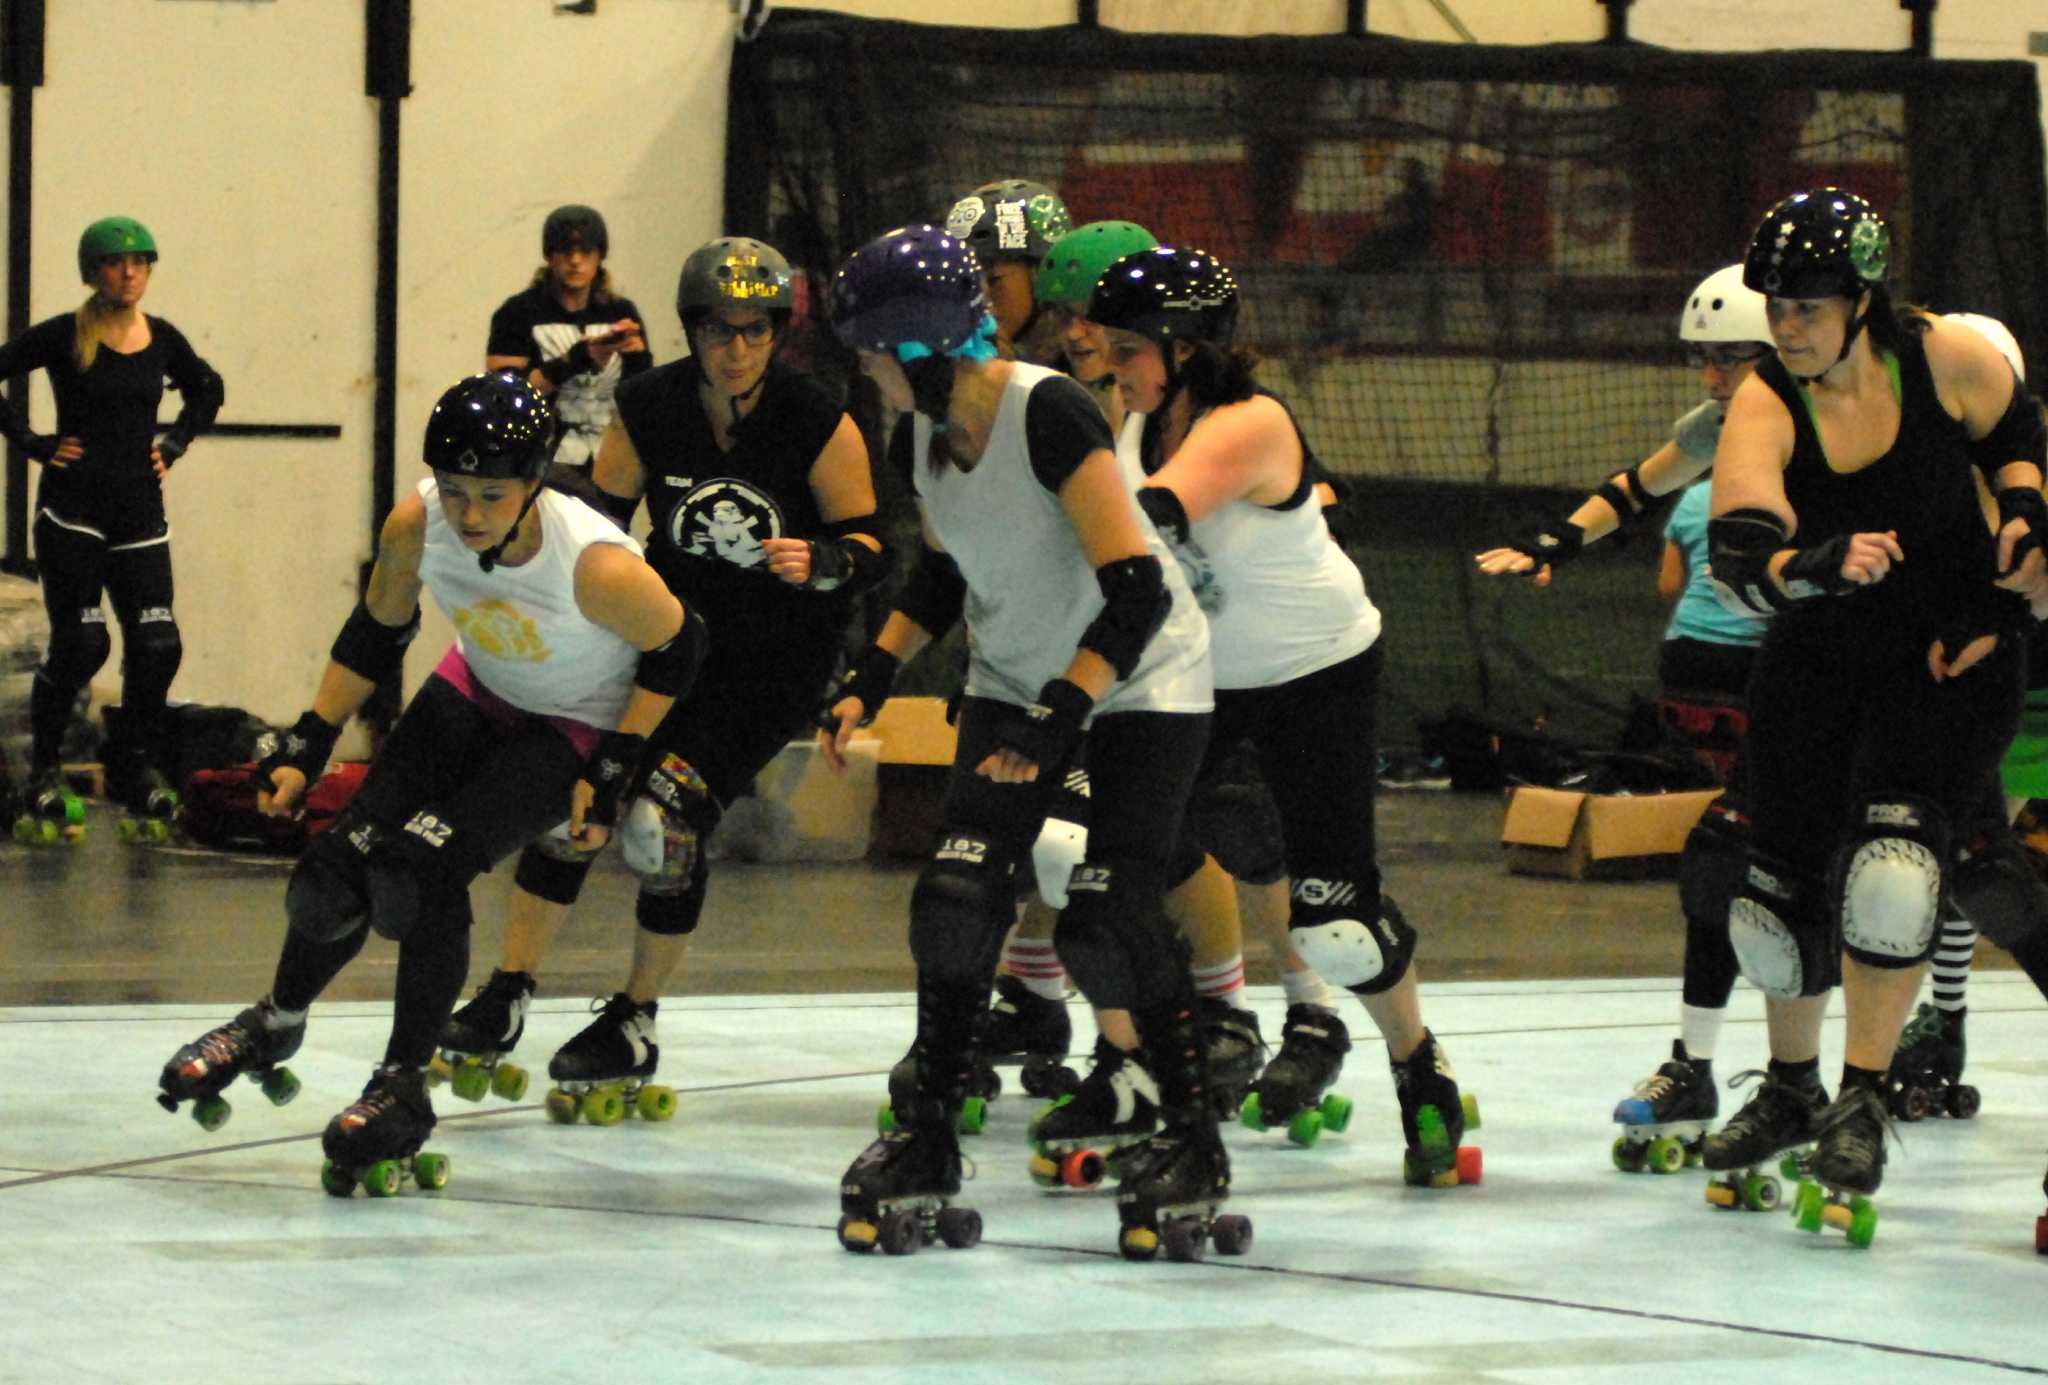 Derby league recruits skaters in Fort Bend County